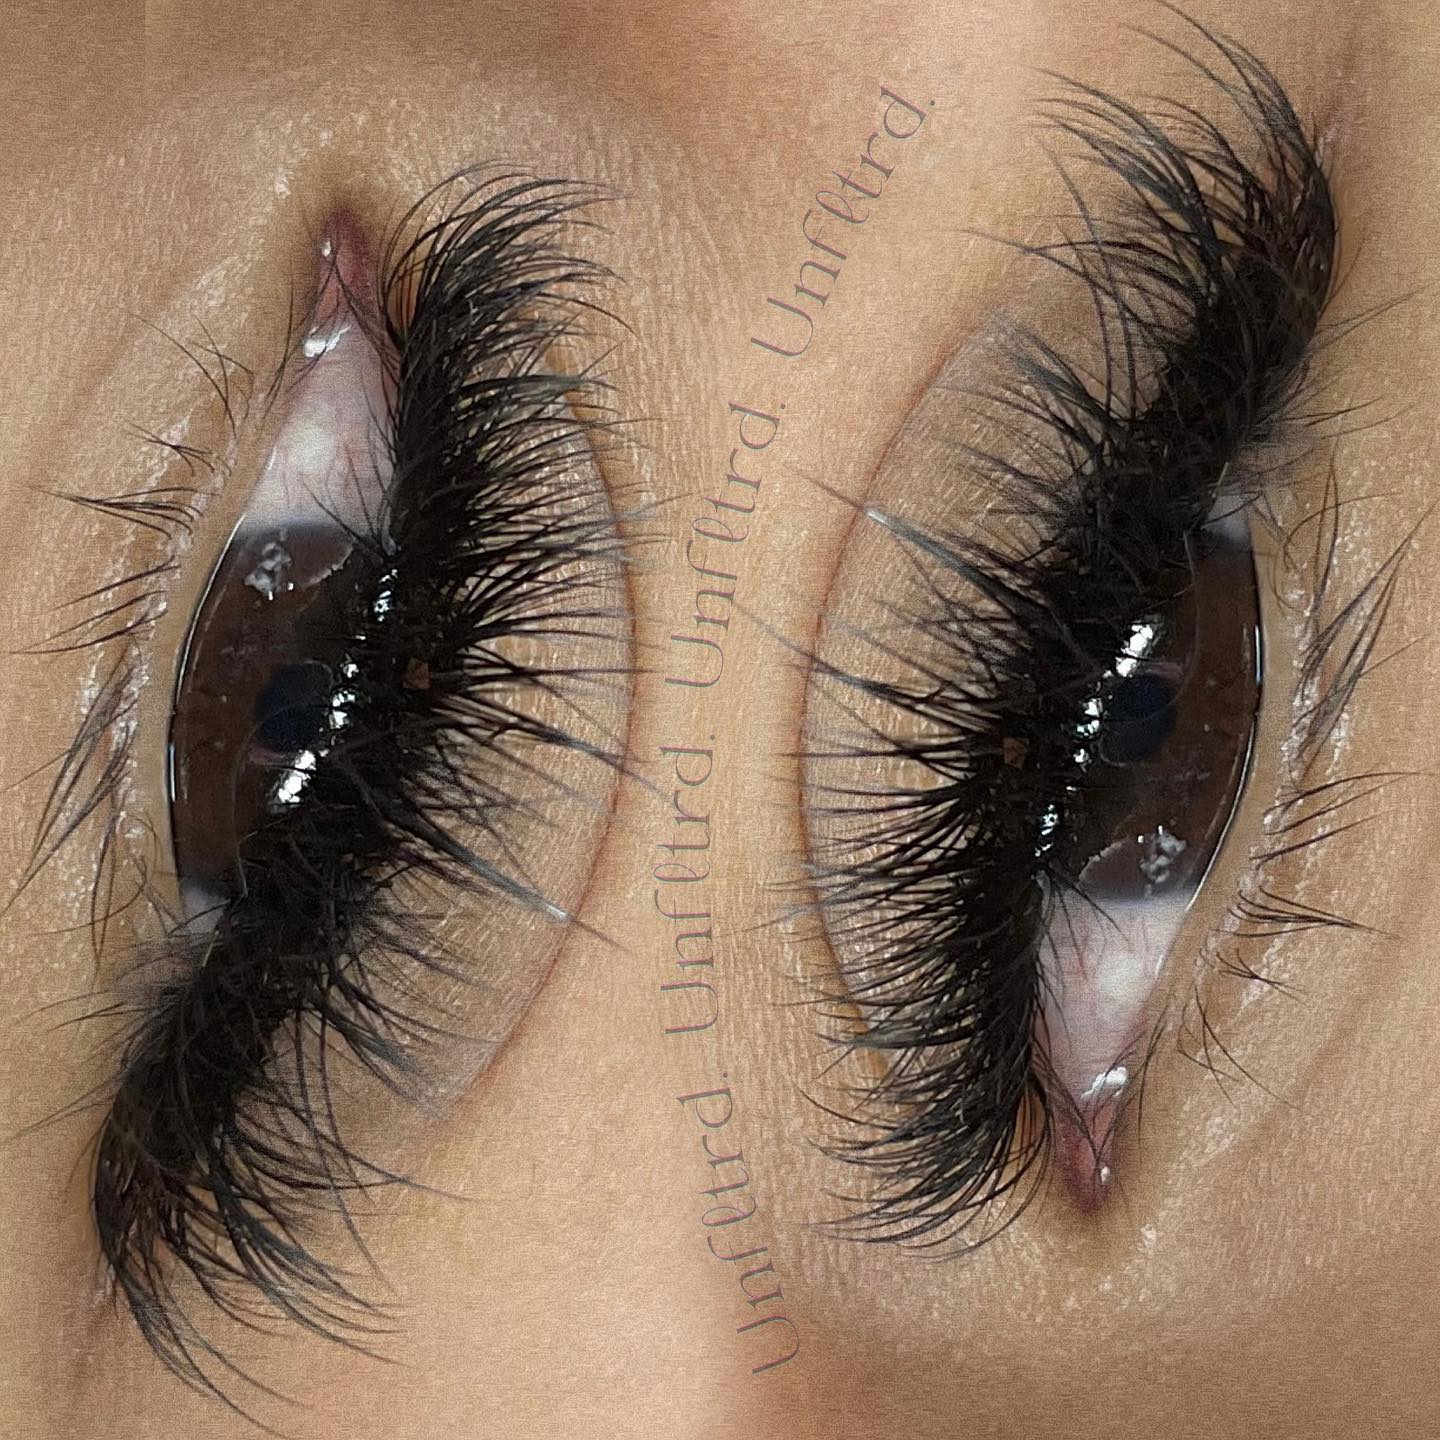 You shouldn’t have to change your life style to enjoy lash extensions! 

The lash industry has improved and advanced. 

